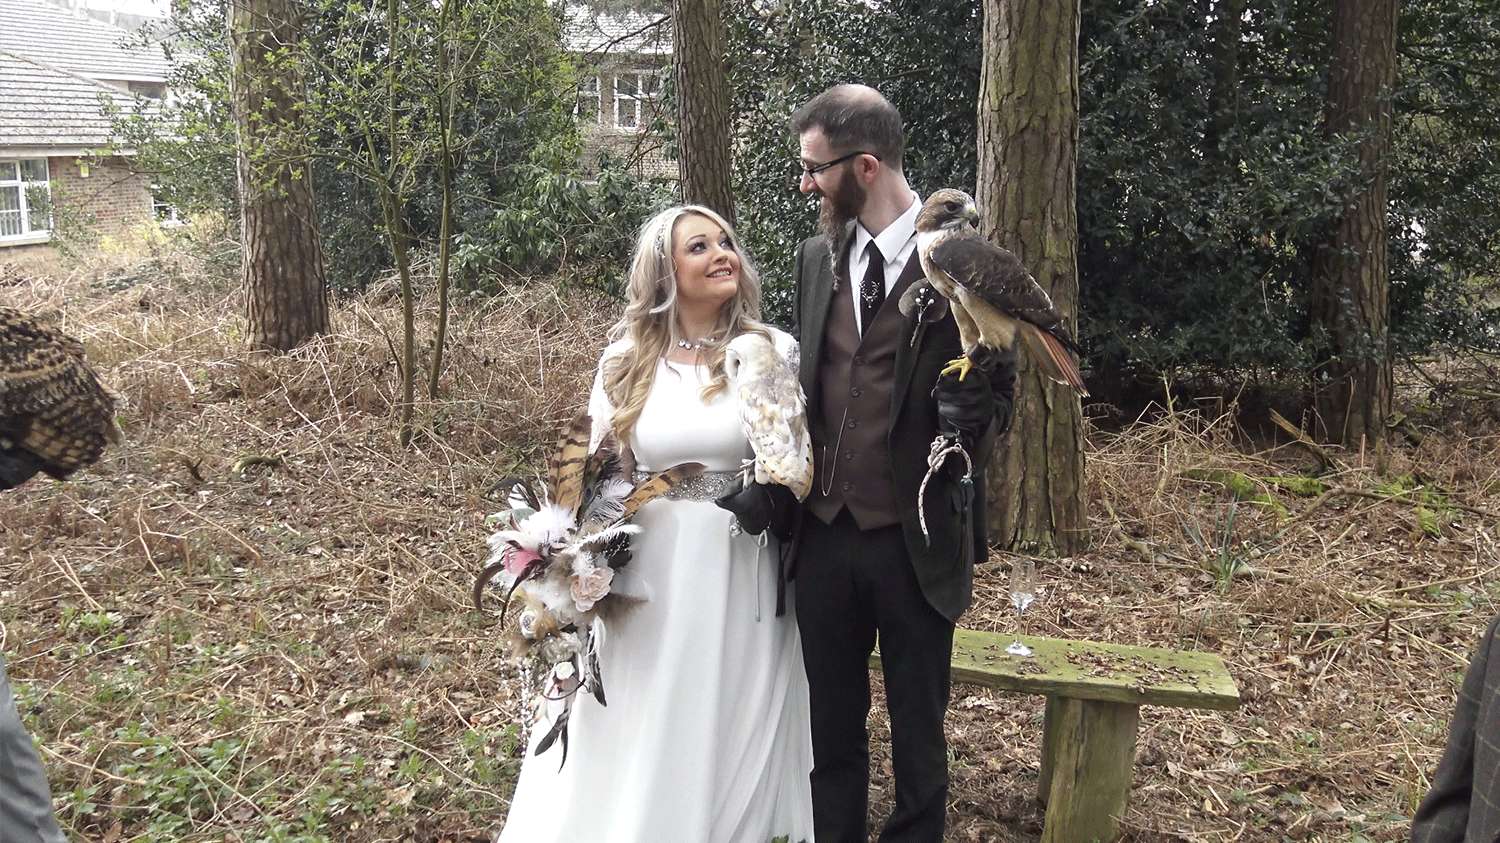 Falconry, forests and feathery friends